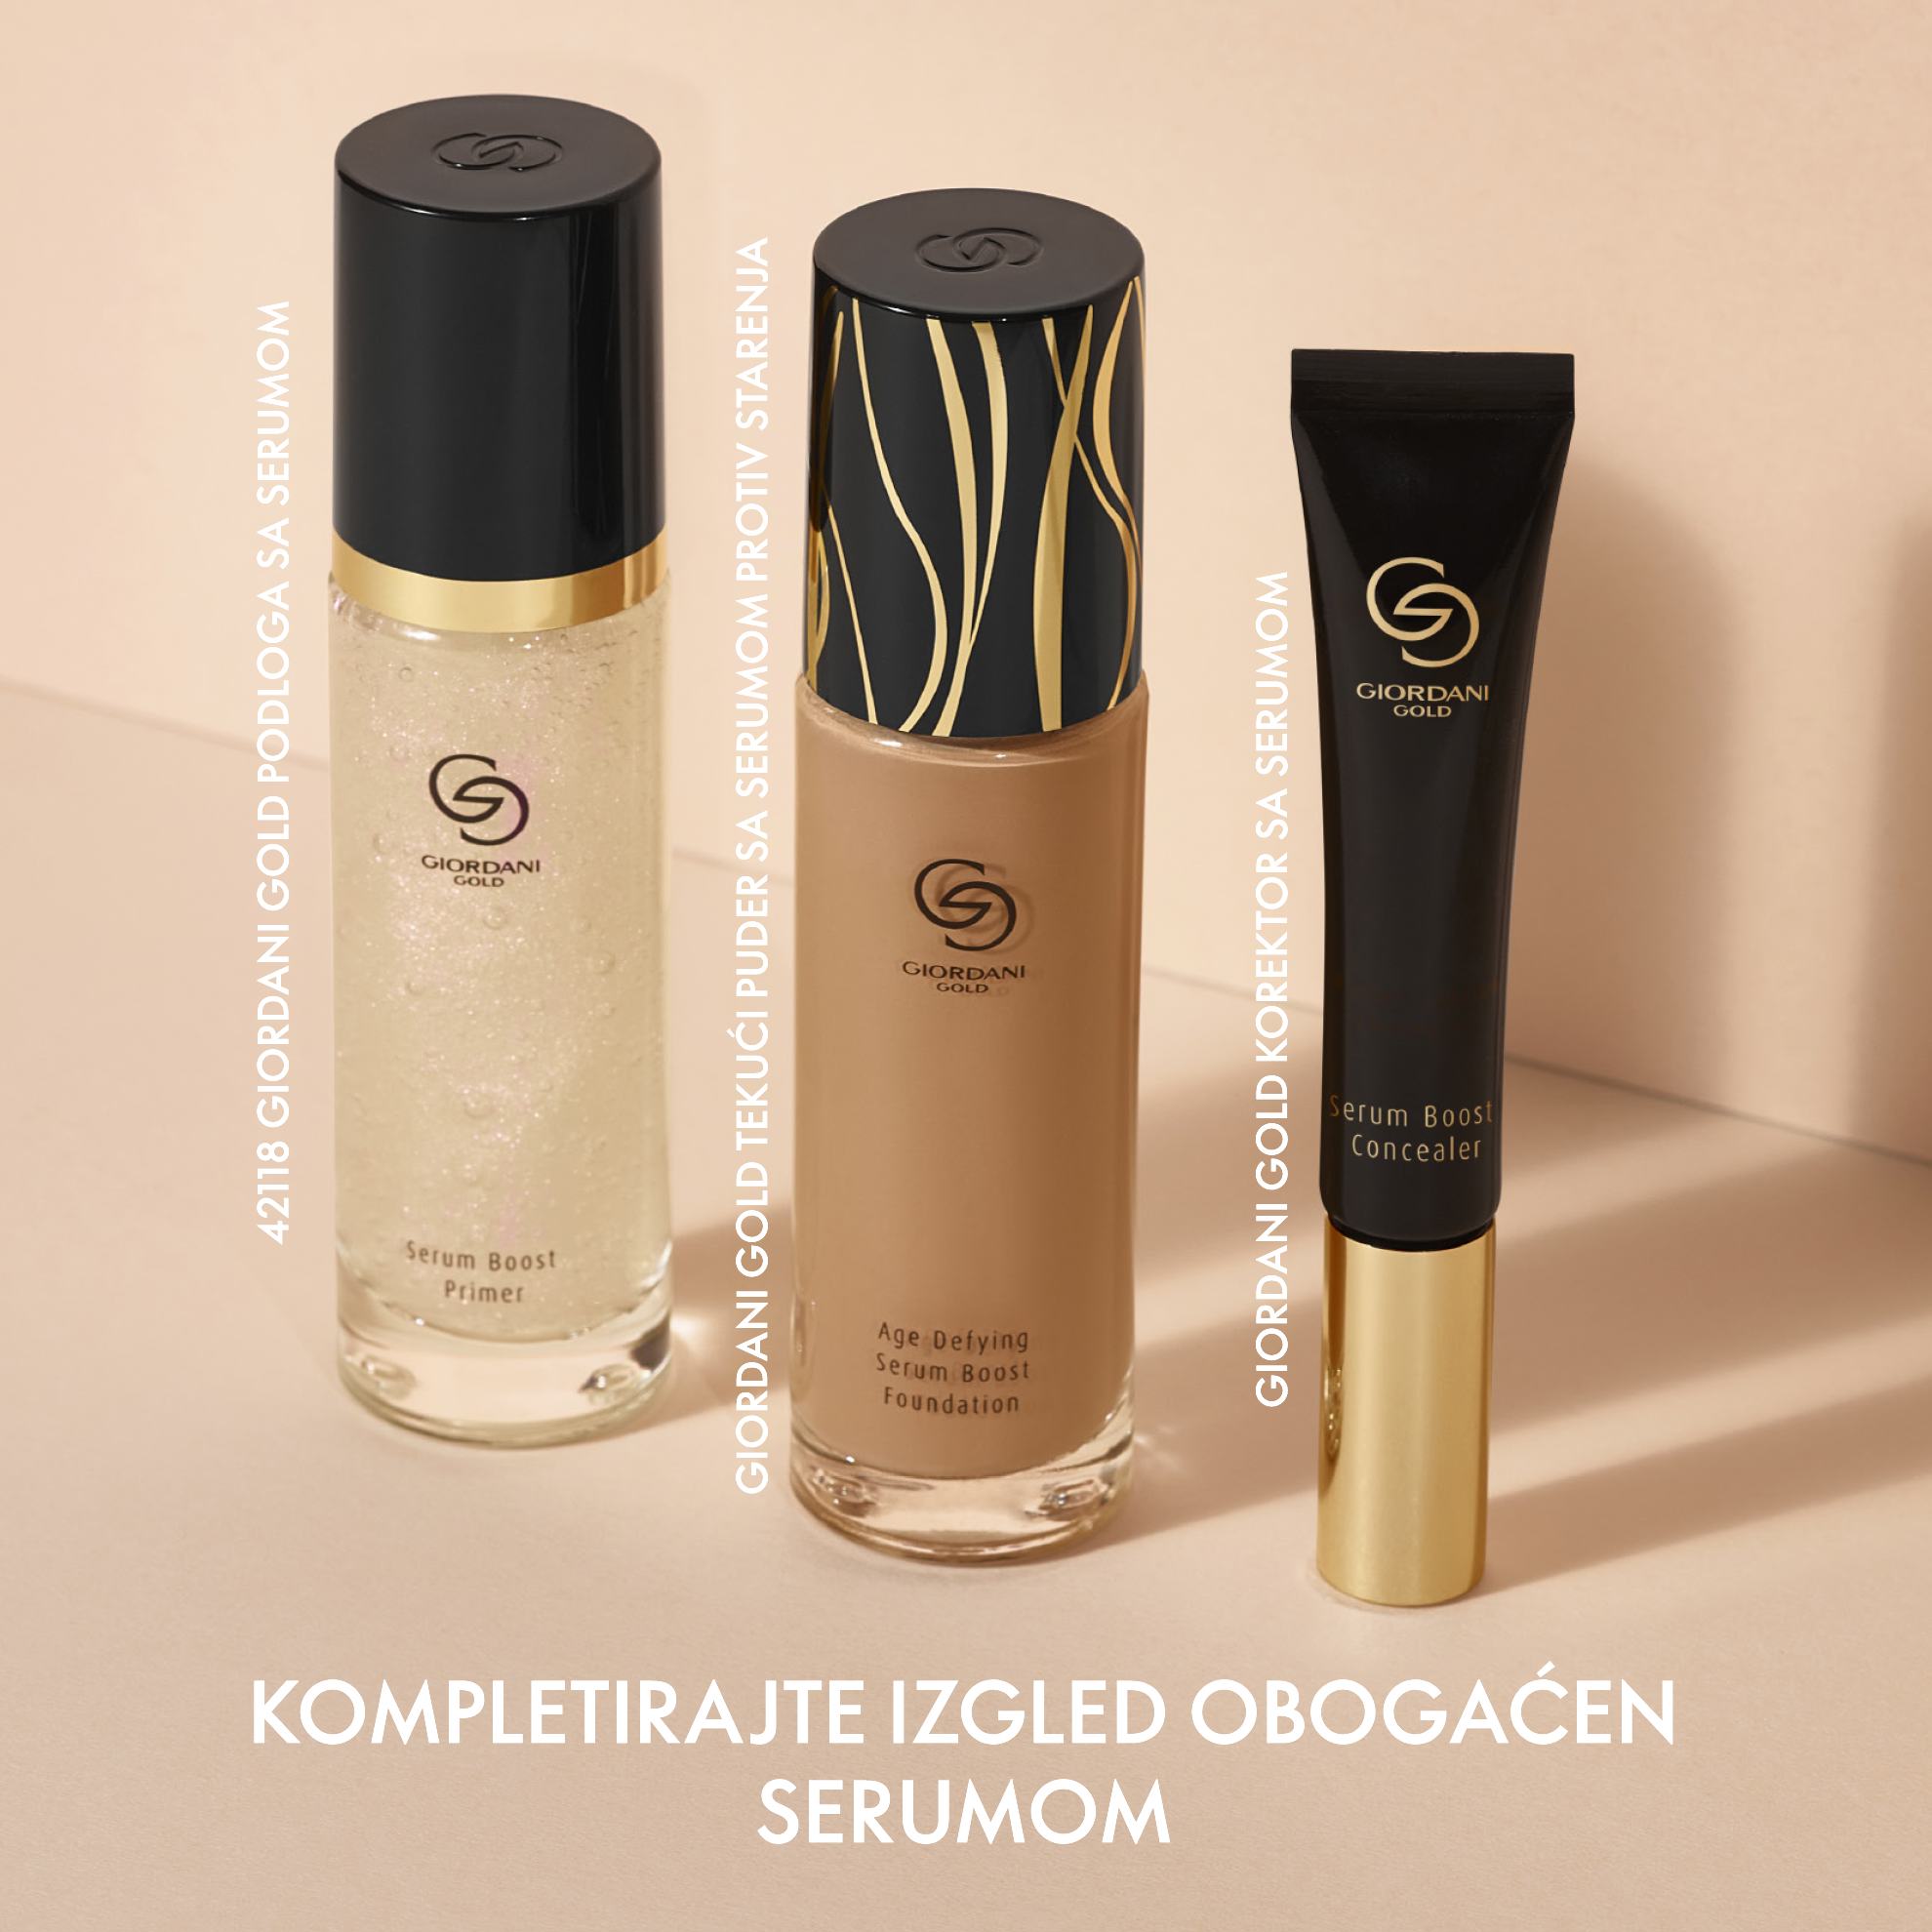 https://media-cdn.oriflame.com/productImage?externalMediaId=product-management-media%2fProducts%2f40953%2fBA%2f40953_7.png&id=16909584&version=1